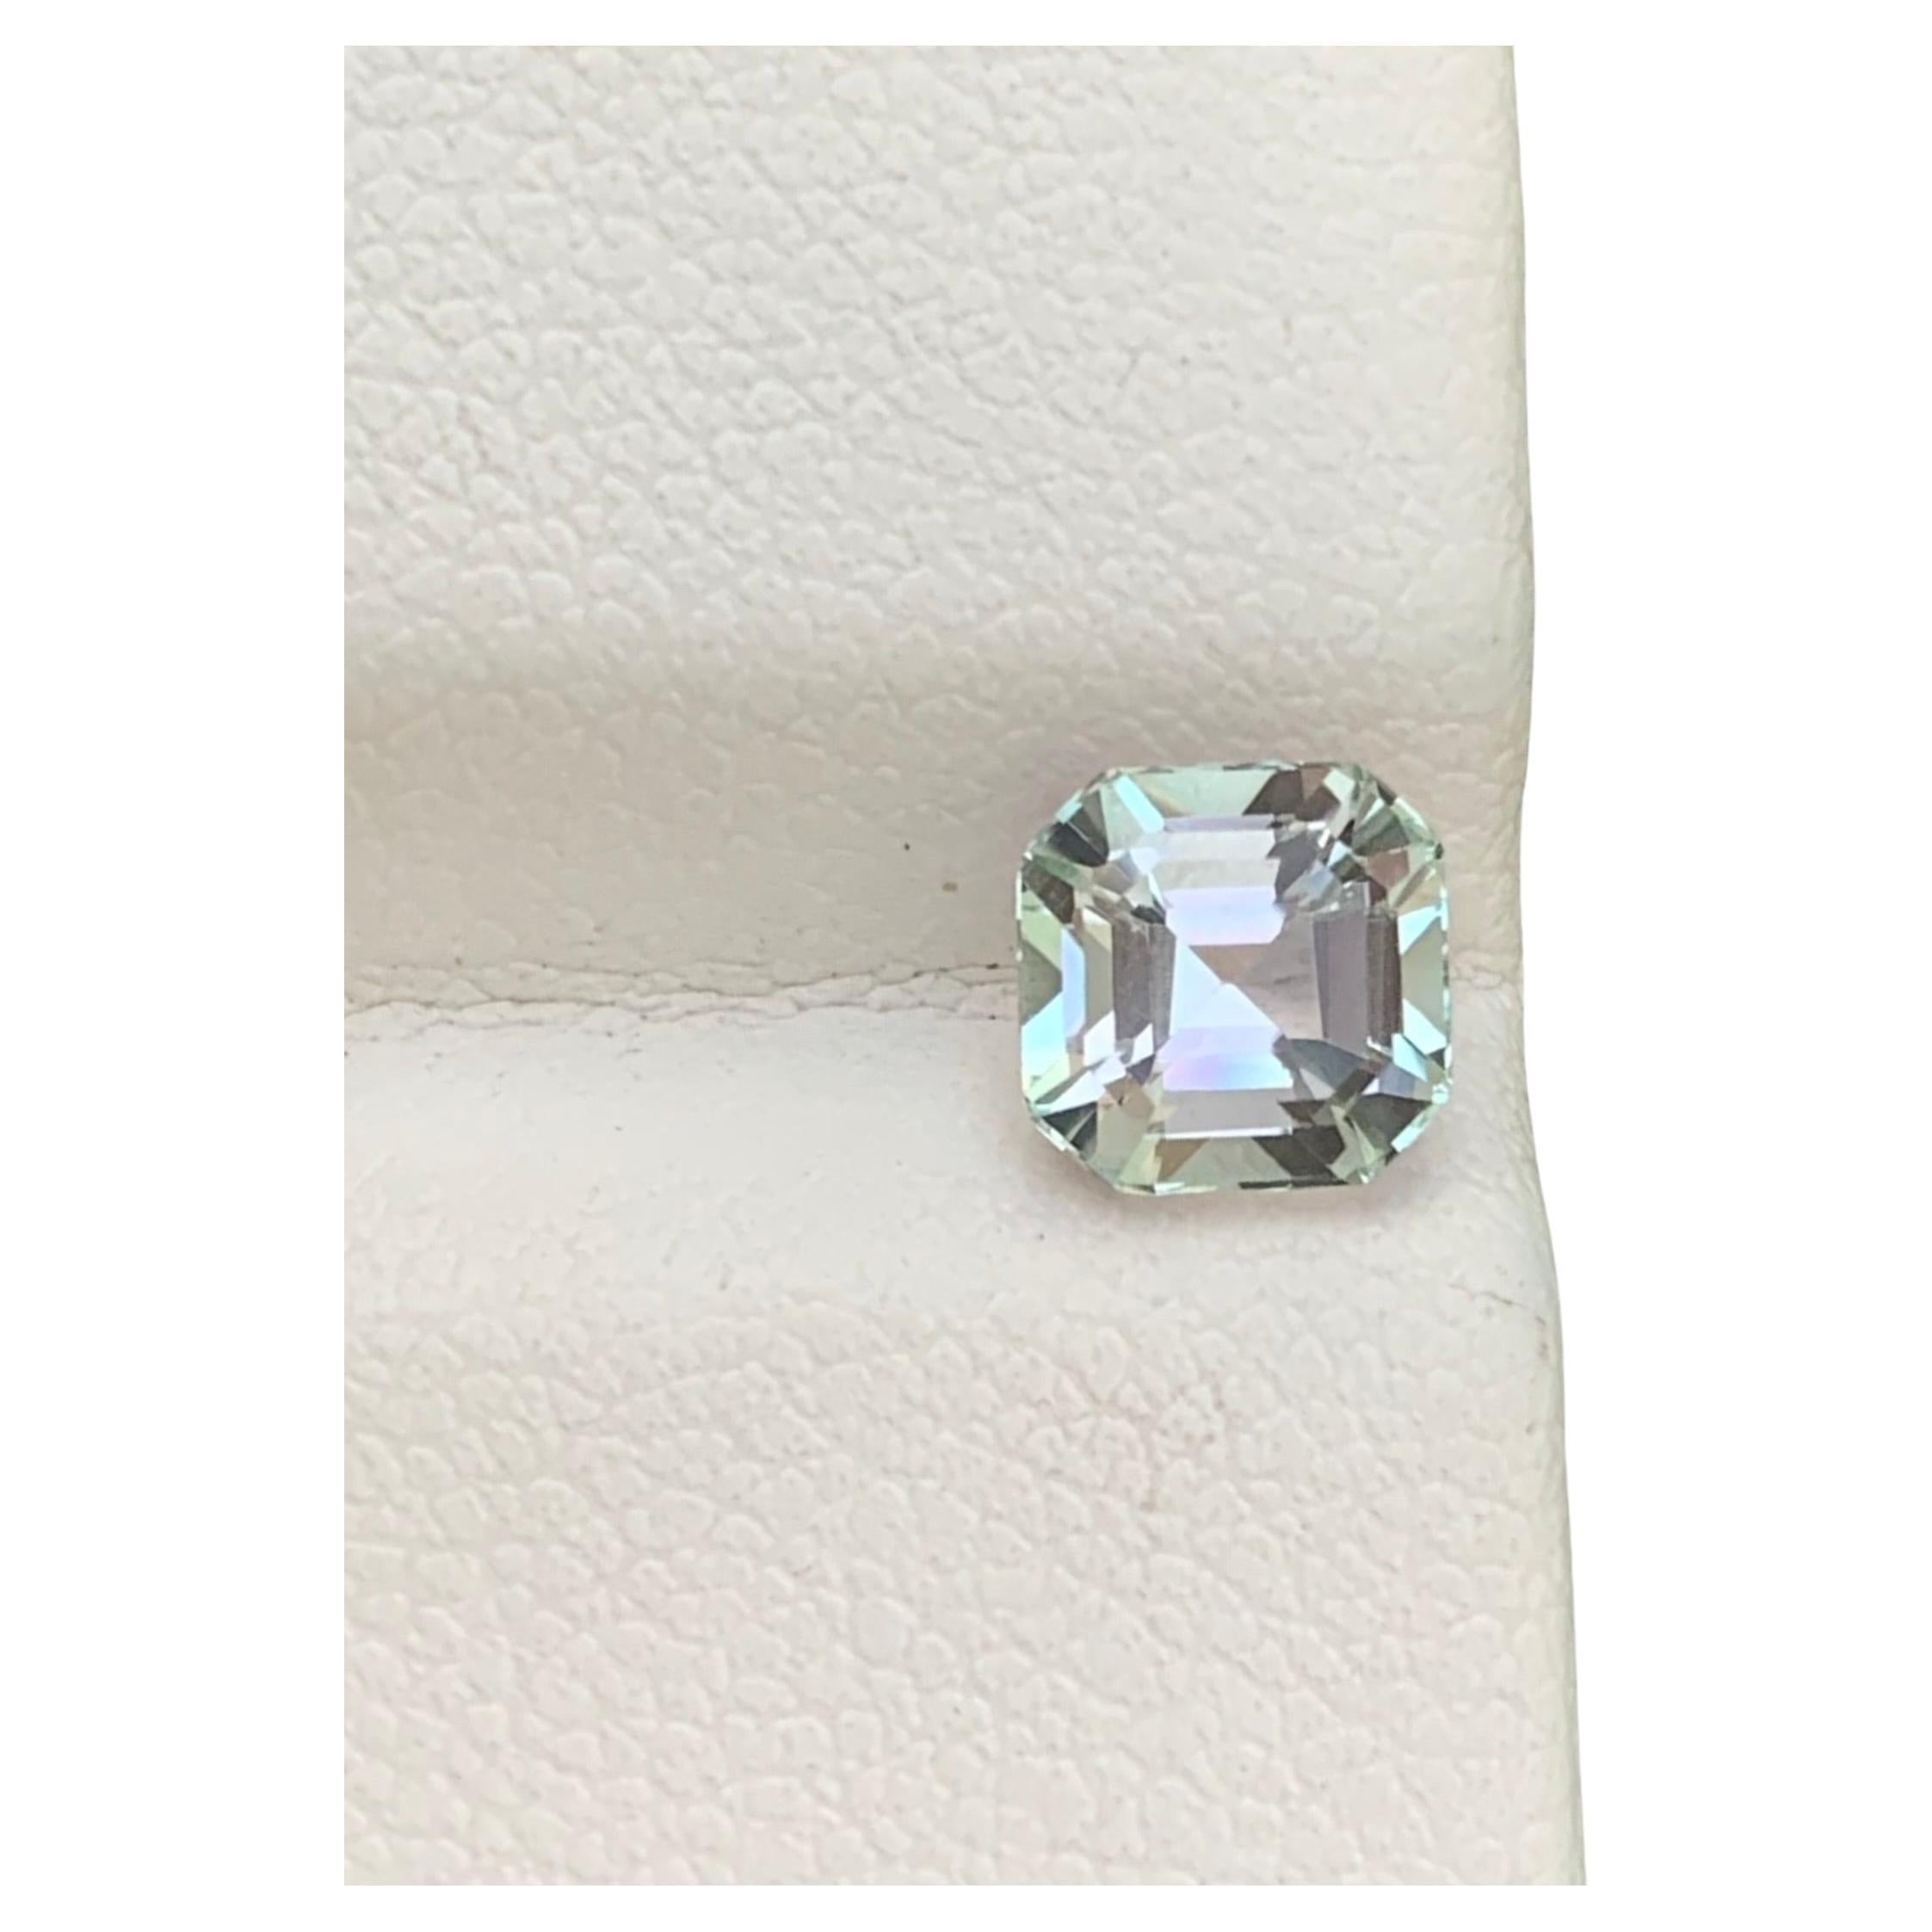 1.40 Carats Small Colorless Loose Tourmaline With Pink Shade For Ring Jewelry For Sale